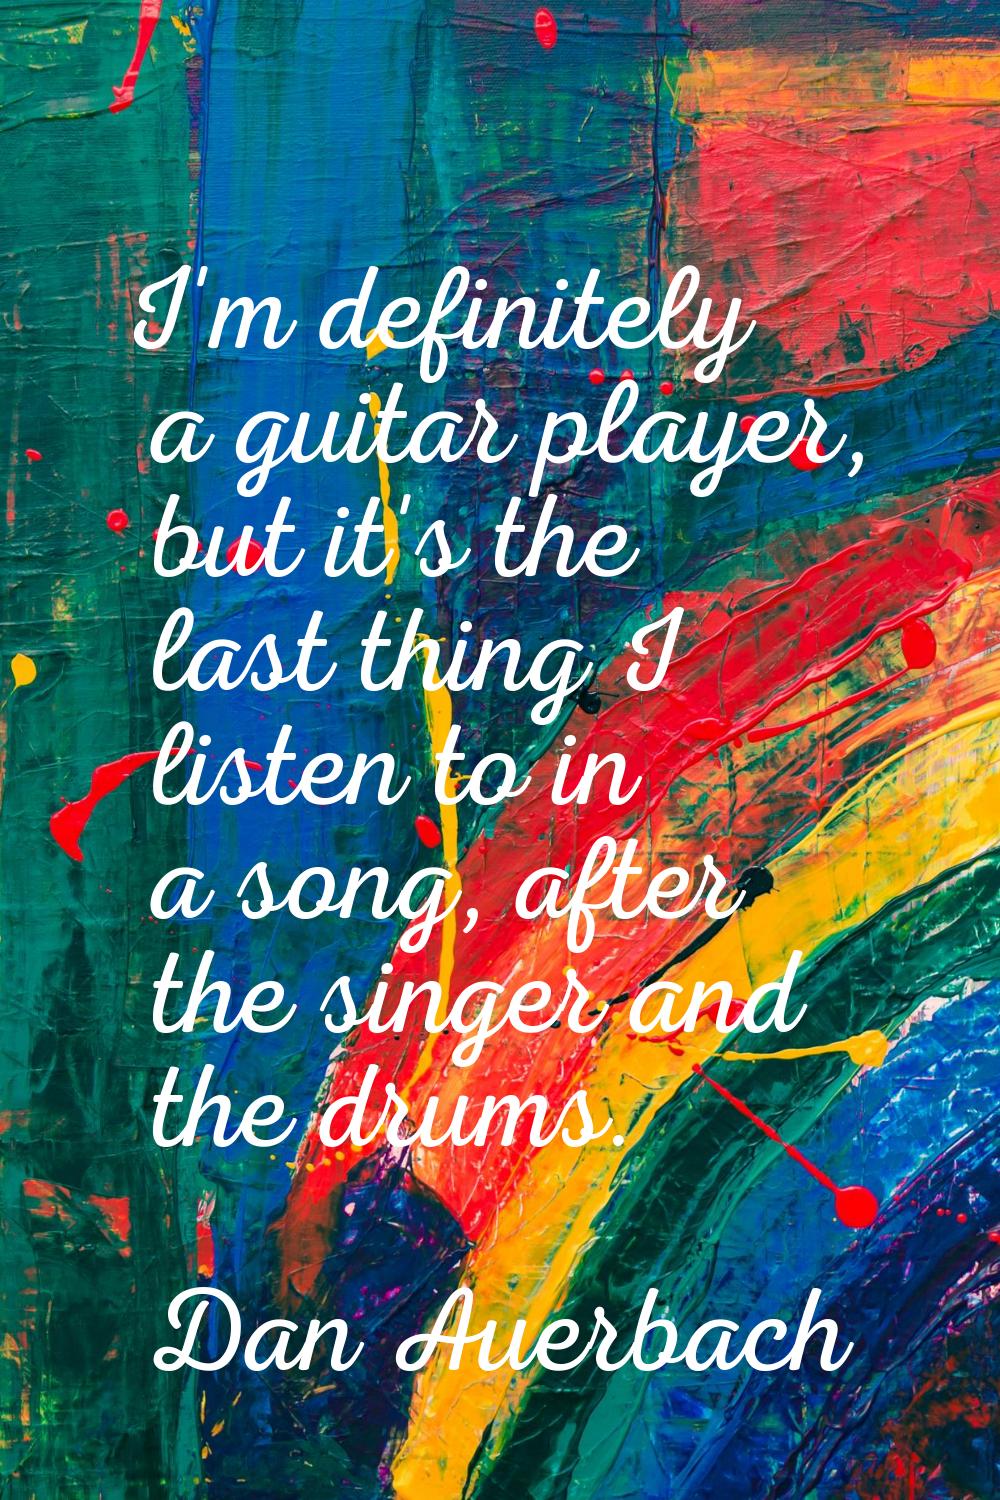 I'm definitely a guitar player, but it's the last thing I listen to in a song, after the singer and